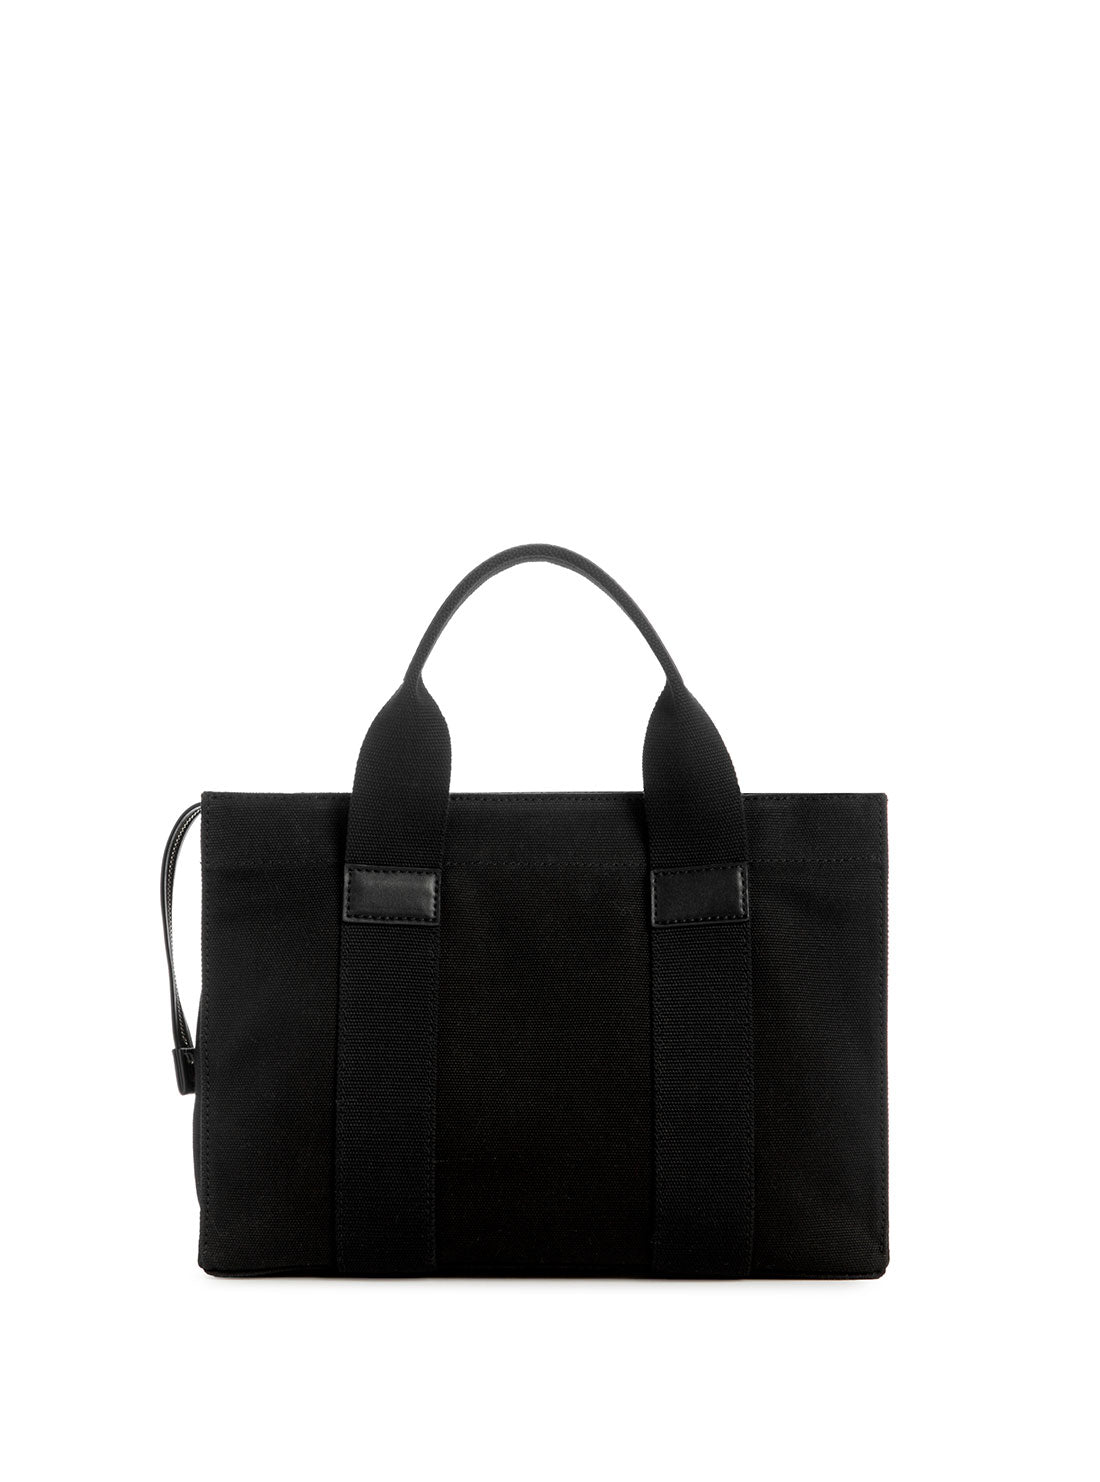 GUESS Black Canvas Small Tote Bag back view